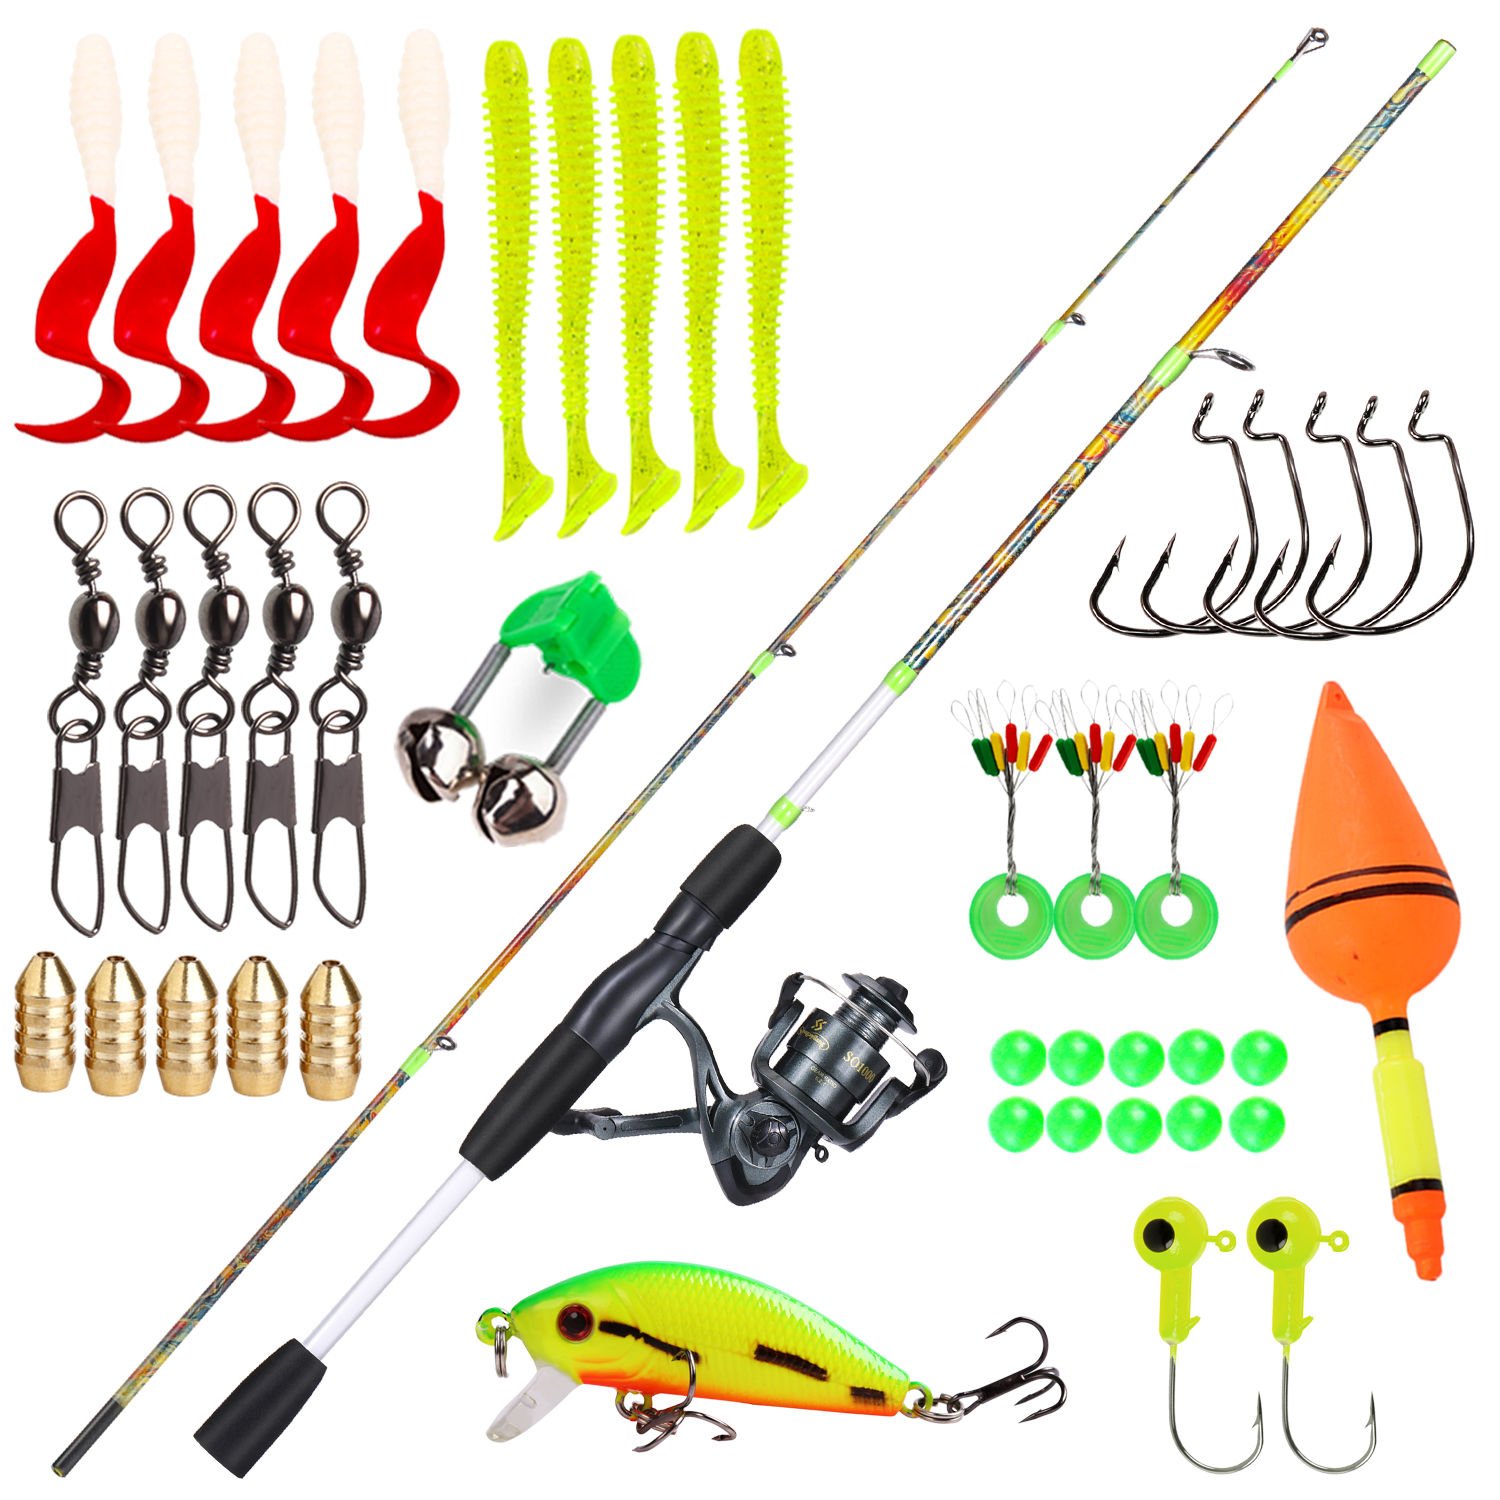 Fishing Rod Sets Full Set 5.2:1 Spinning Fishing Reels Carbon Spinning Rods  Fishing for Saltwater Fishing Accessories